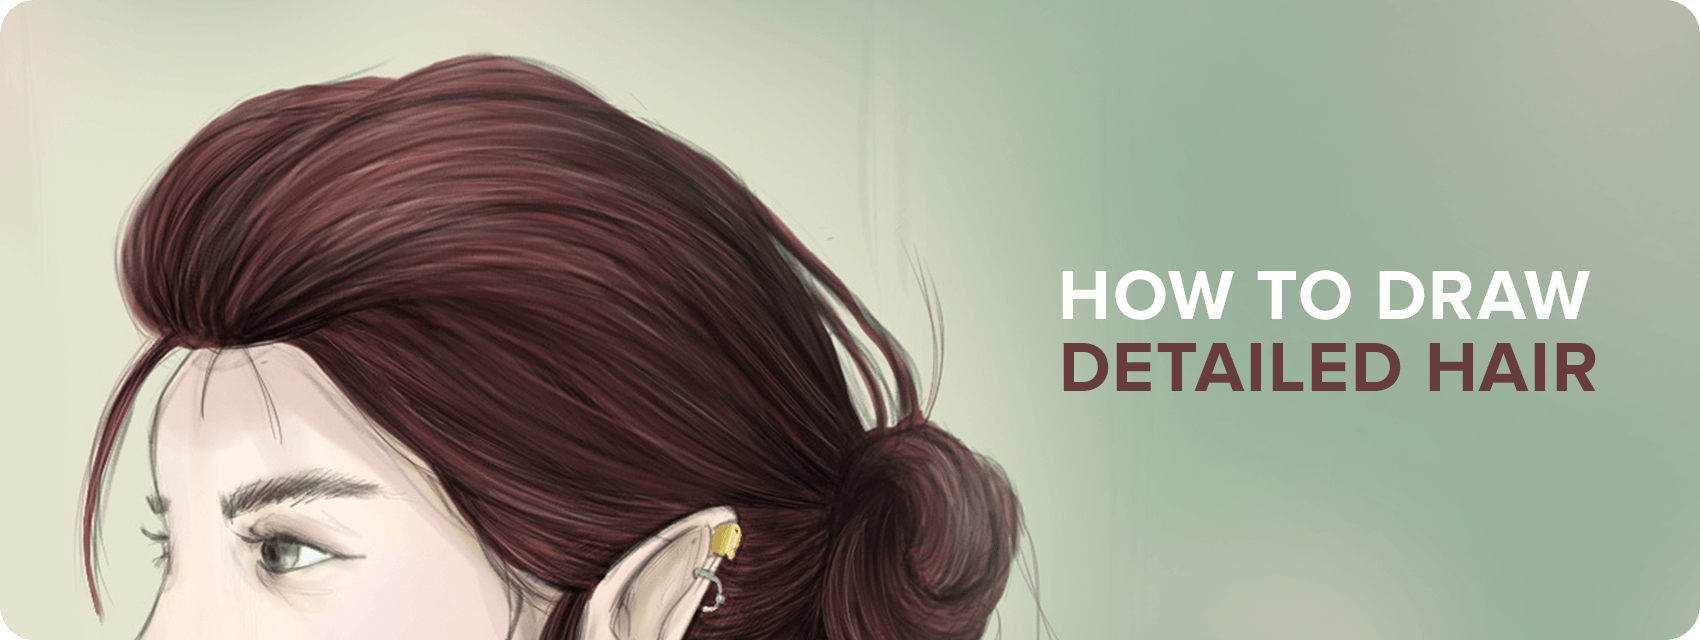 Woman with Flowing Hair with Back Logo - How to Draw Hair Tutorial: Step by Step Instructions